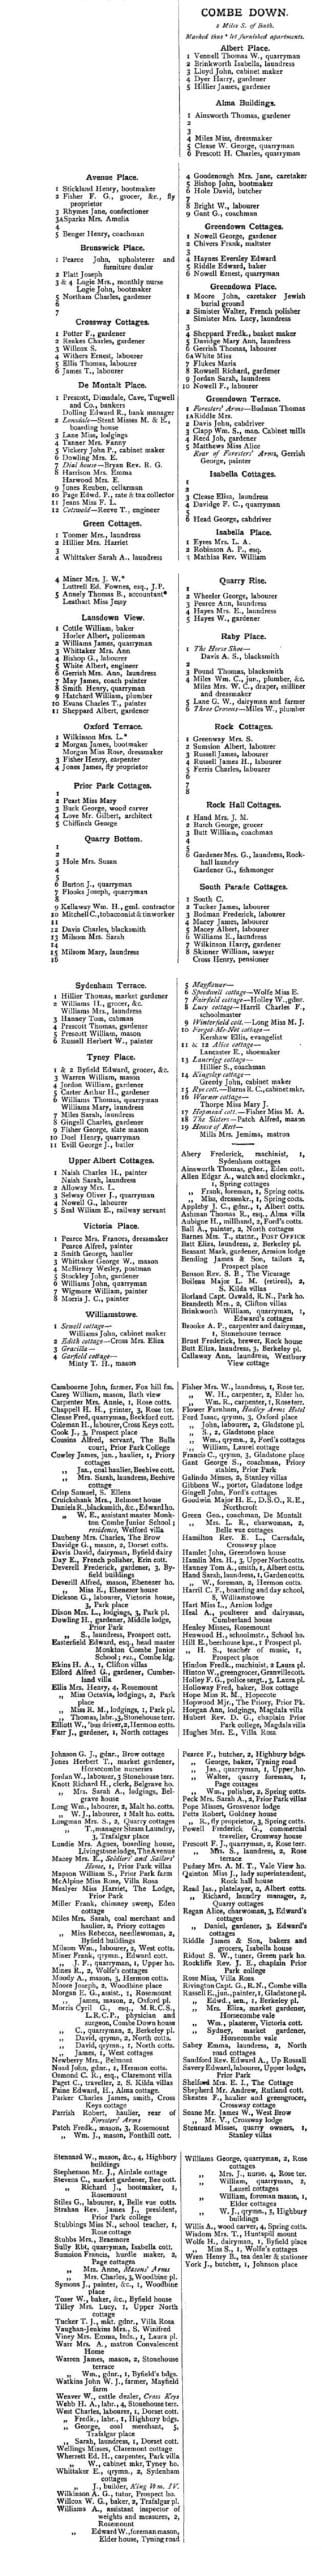 1902 Post Office Directory for Combe Down